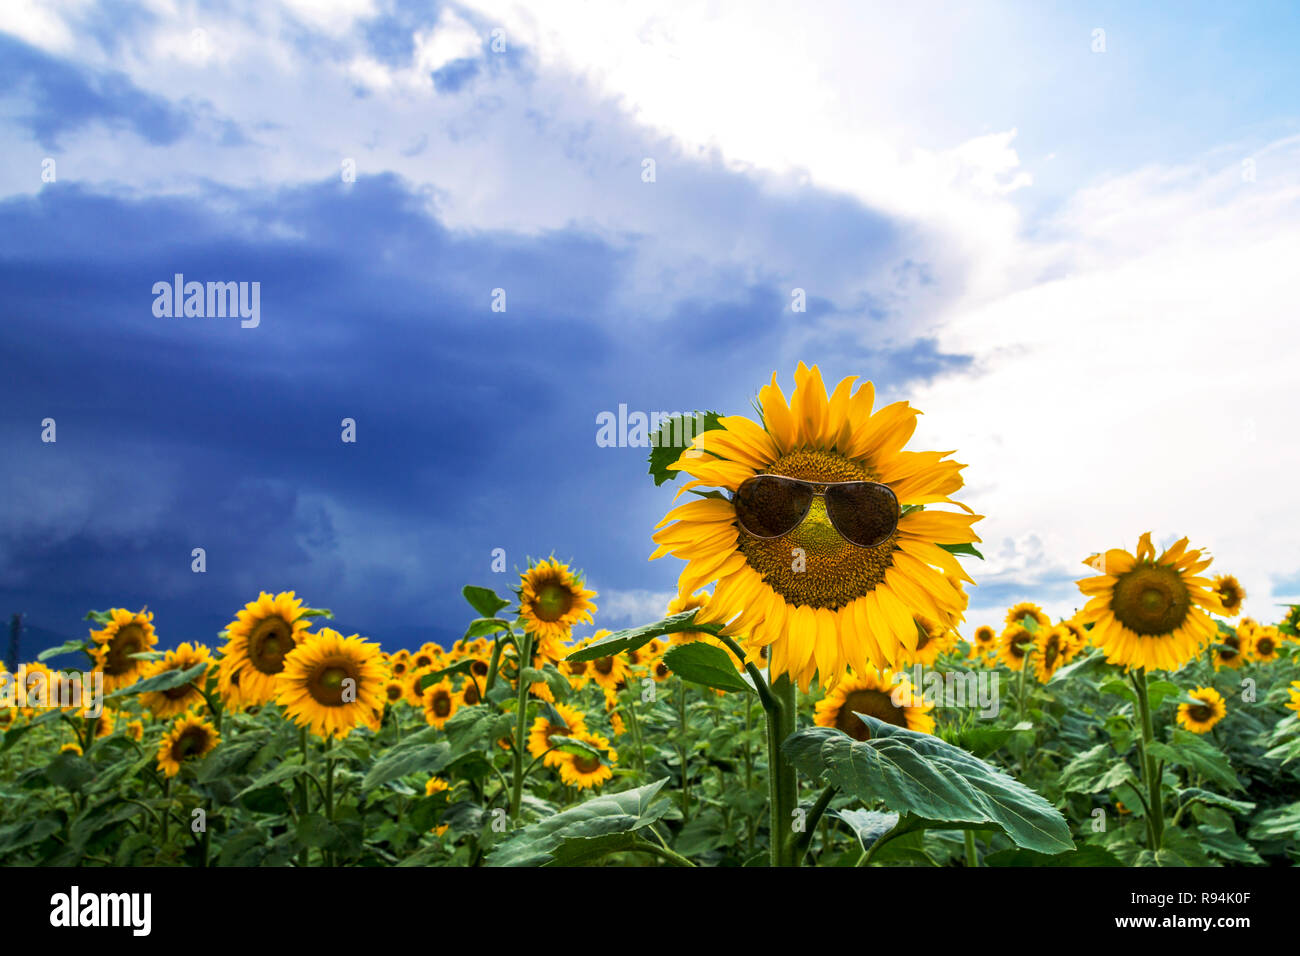 Sunflower field with a merry sunflower with sunglasses Stock Photo